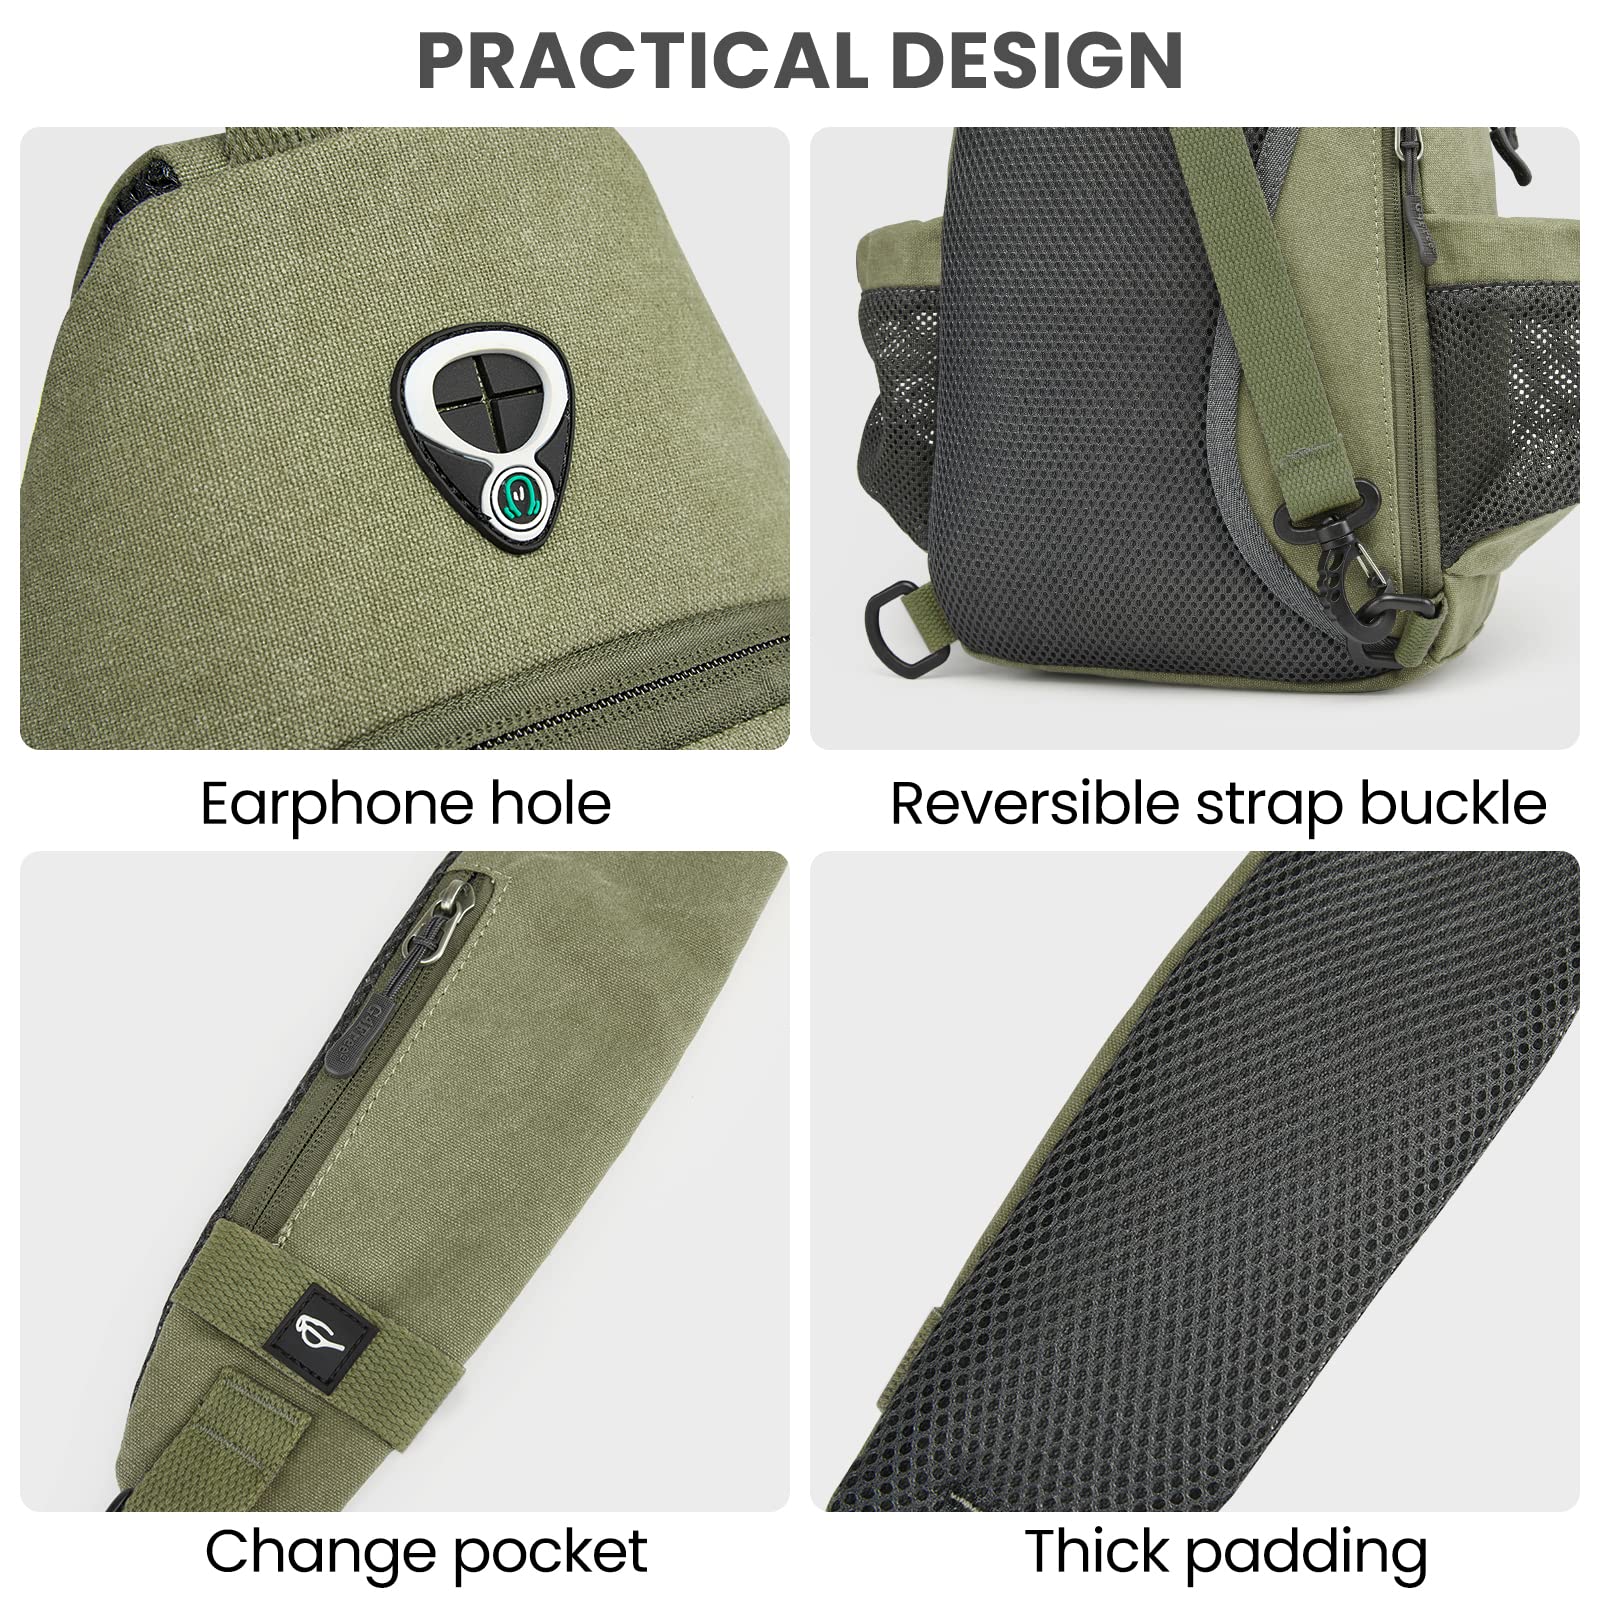 G4Free Canvas Sling Bag Crossbody Backpack with USB Charging Port & RFID Blocking, Hiking Daypack Chest Bag for Women Men